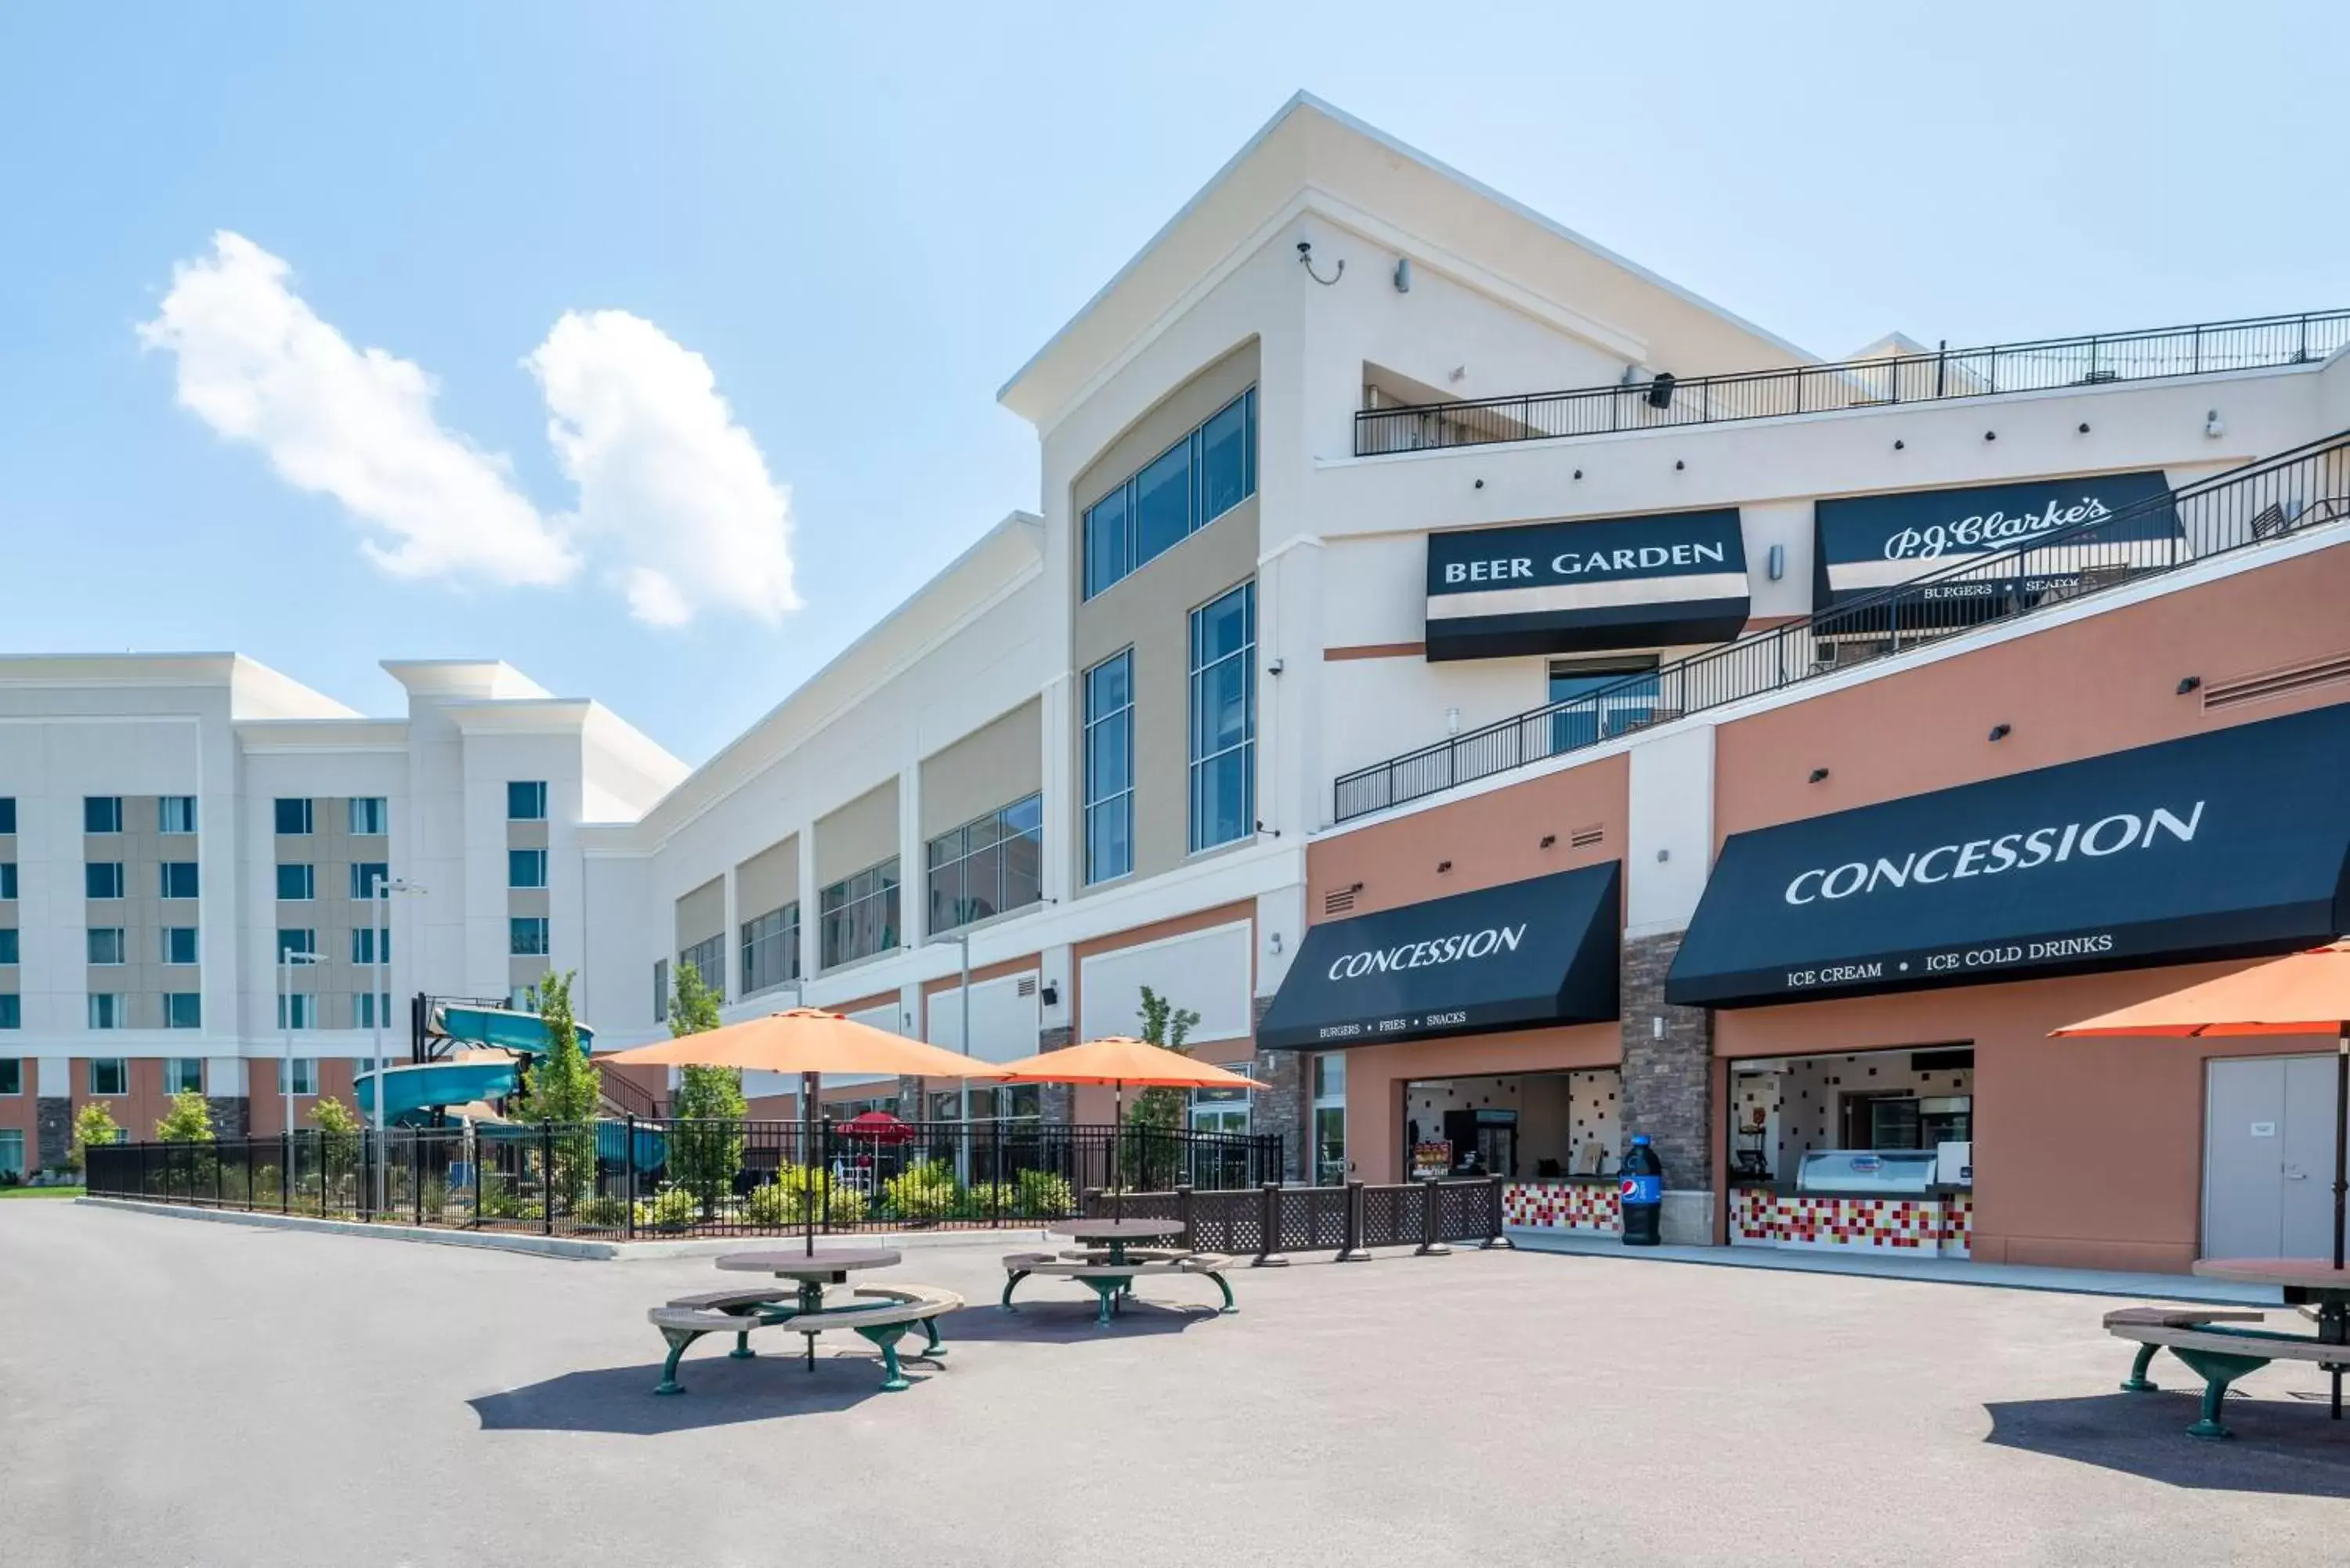 Patio, Property Building in Tioga Downs Casino and Resort